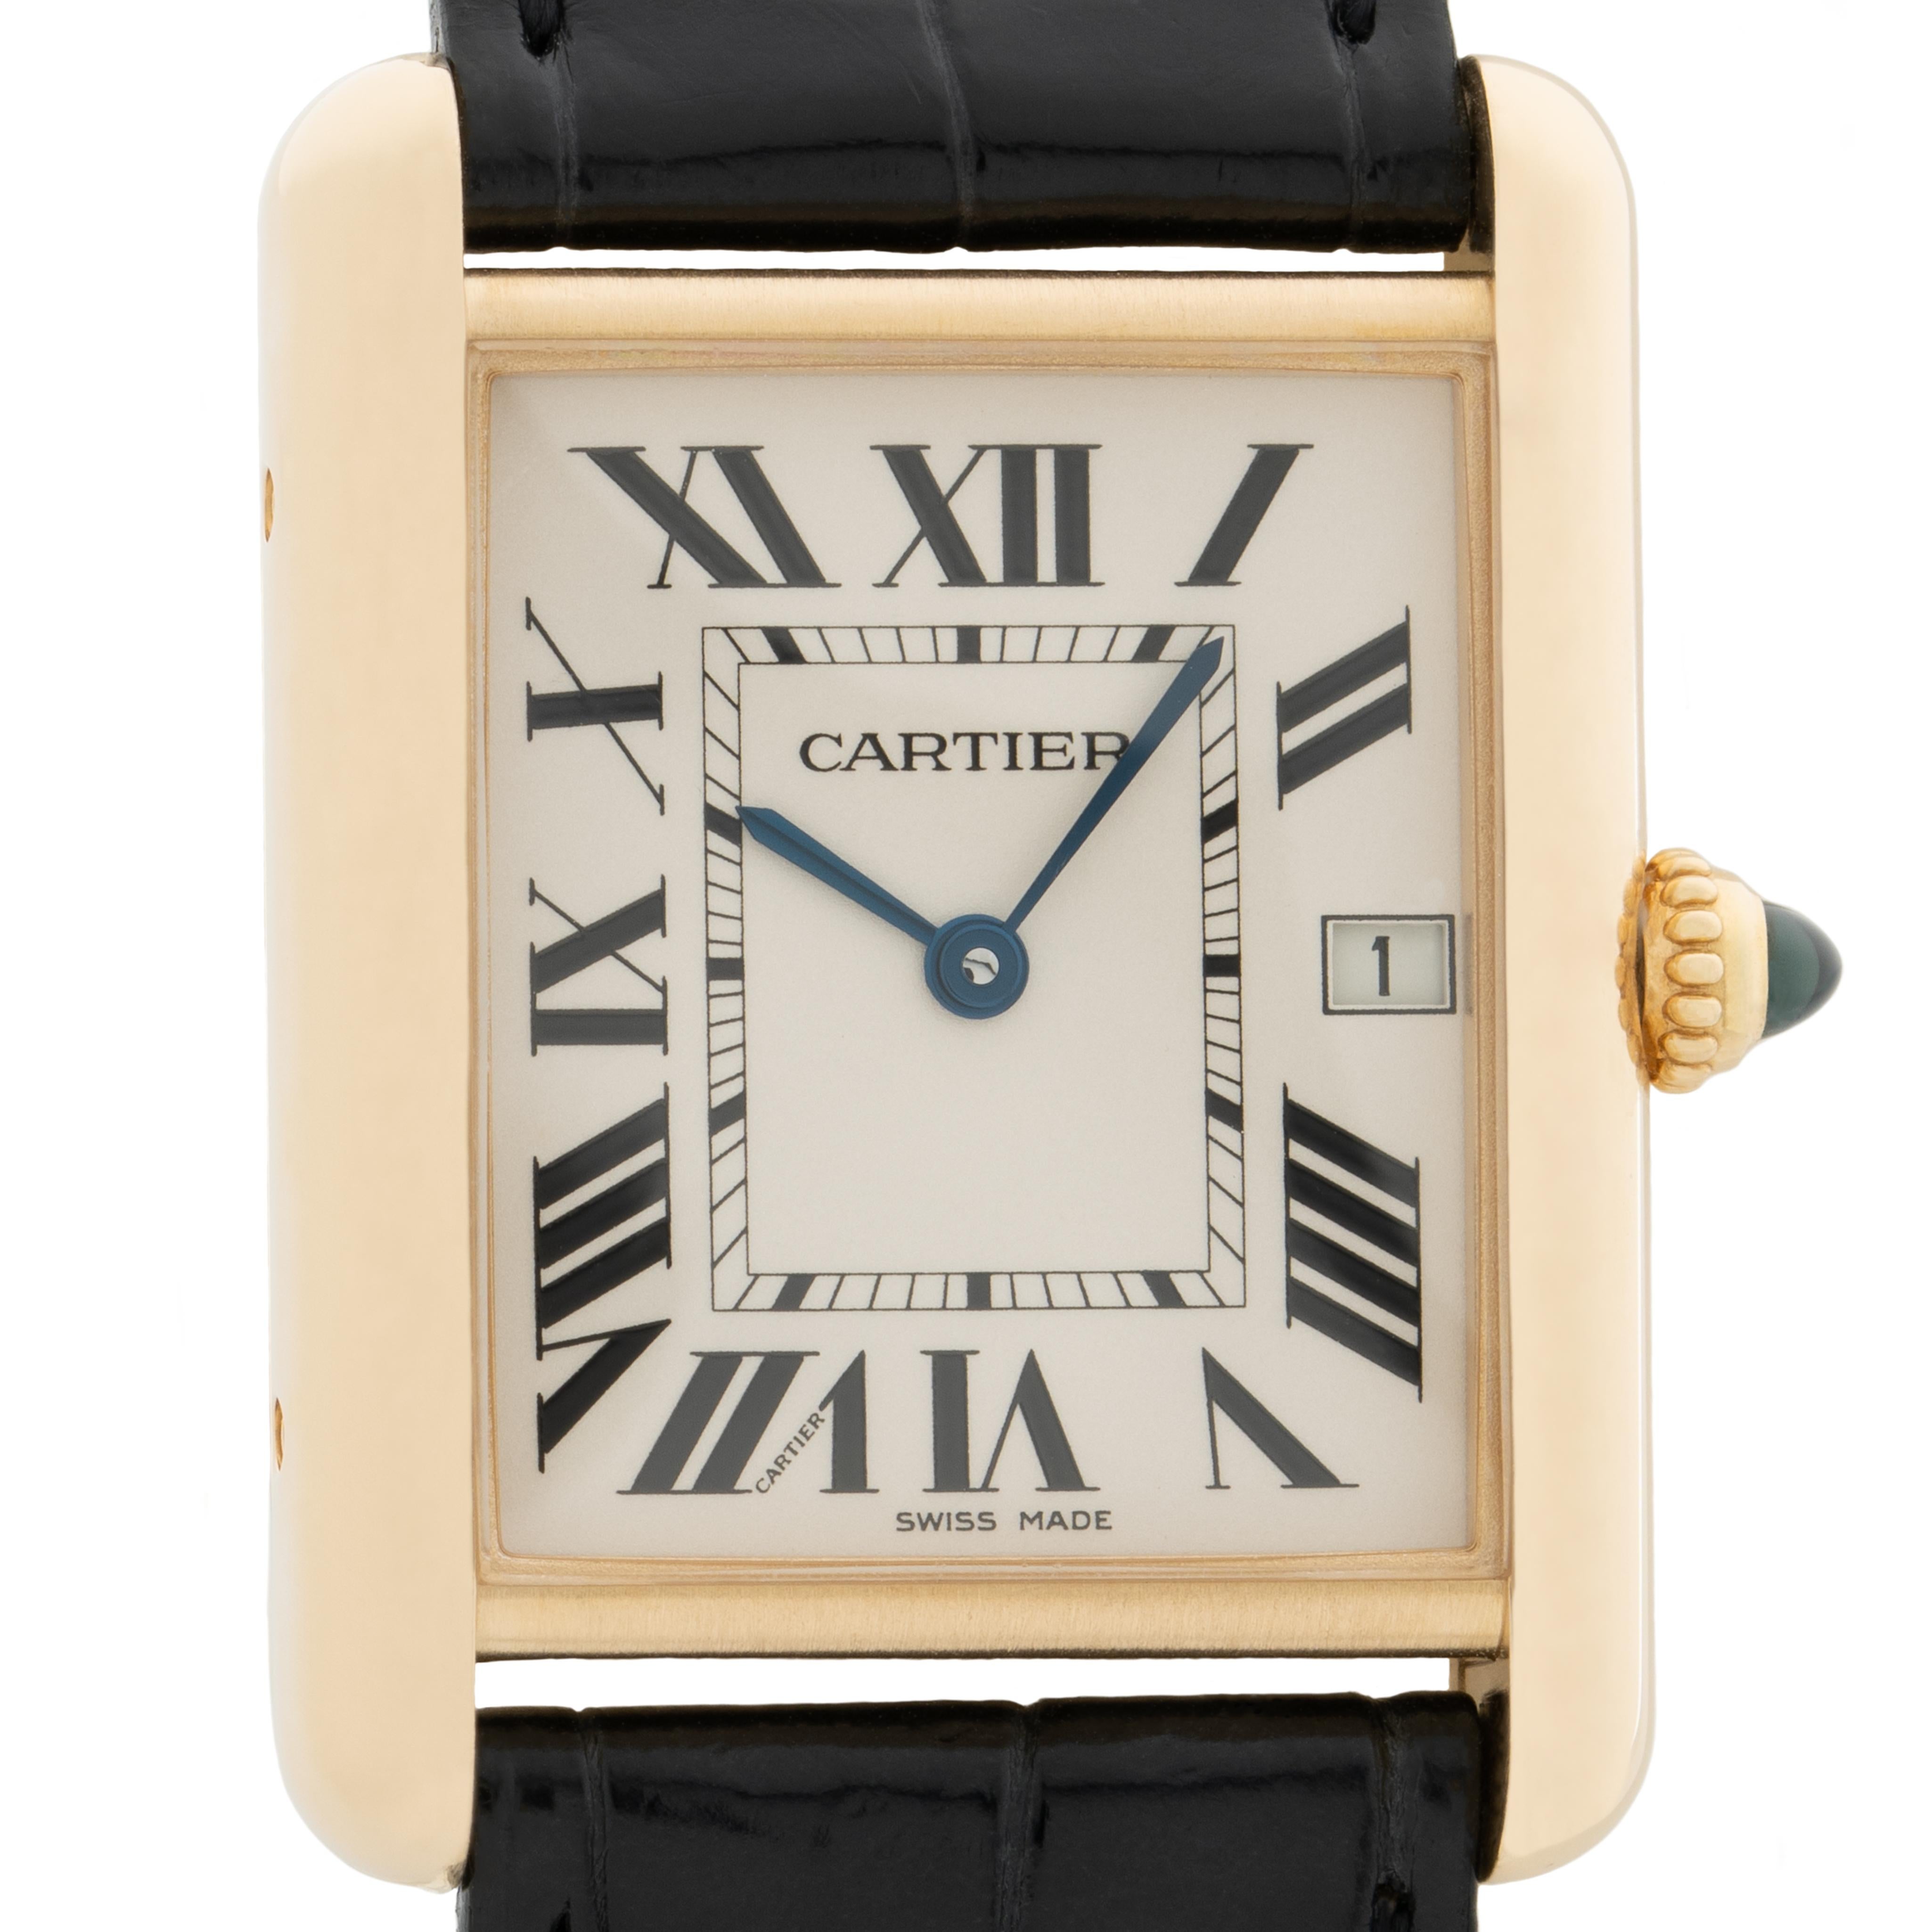 Cartier 18 Karat Yellow Gold Tank Louis Model 2441 with Date c.2003
26mm x 34mm
Quartz Movement
ships in a Cartier red travel pouch

Stephanie Windsor guarantees the proper functioning of this watch mechanism for ONE year from the purchase date. Our